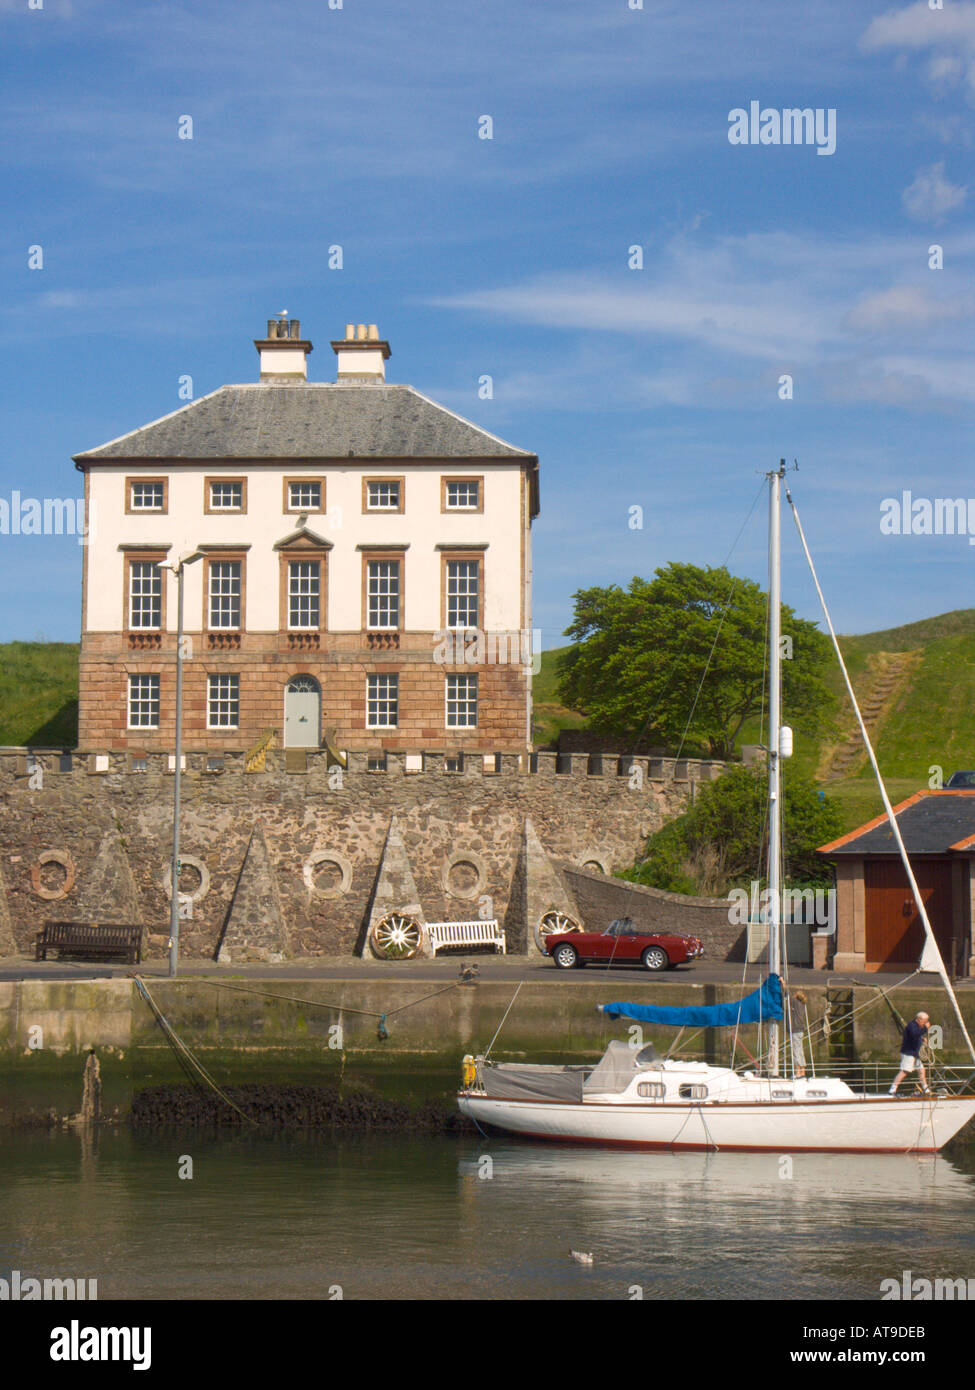 The fishing port of Eyemouth Berwickshire with the 18th century Gunsgreen House and leisure yachting Stock Photo